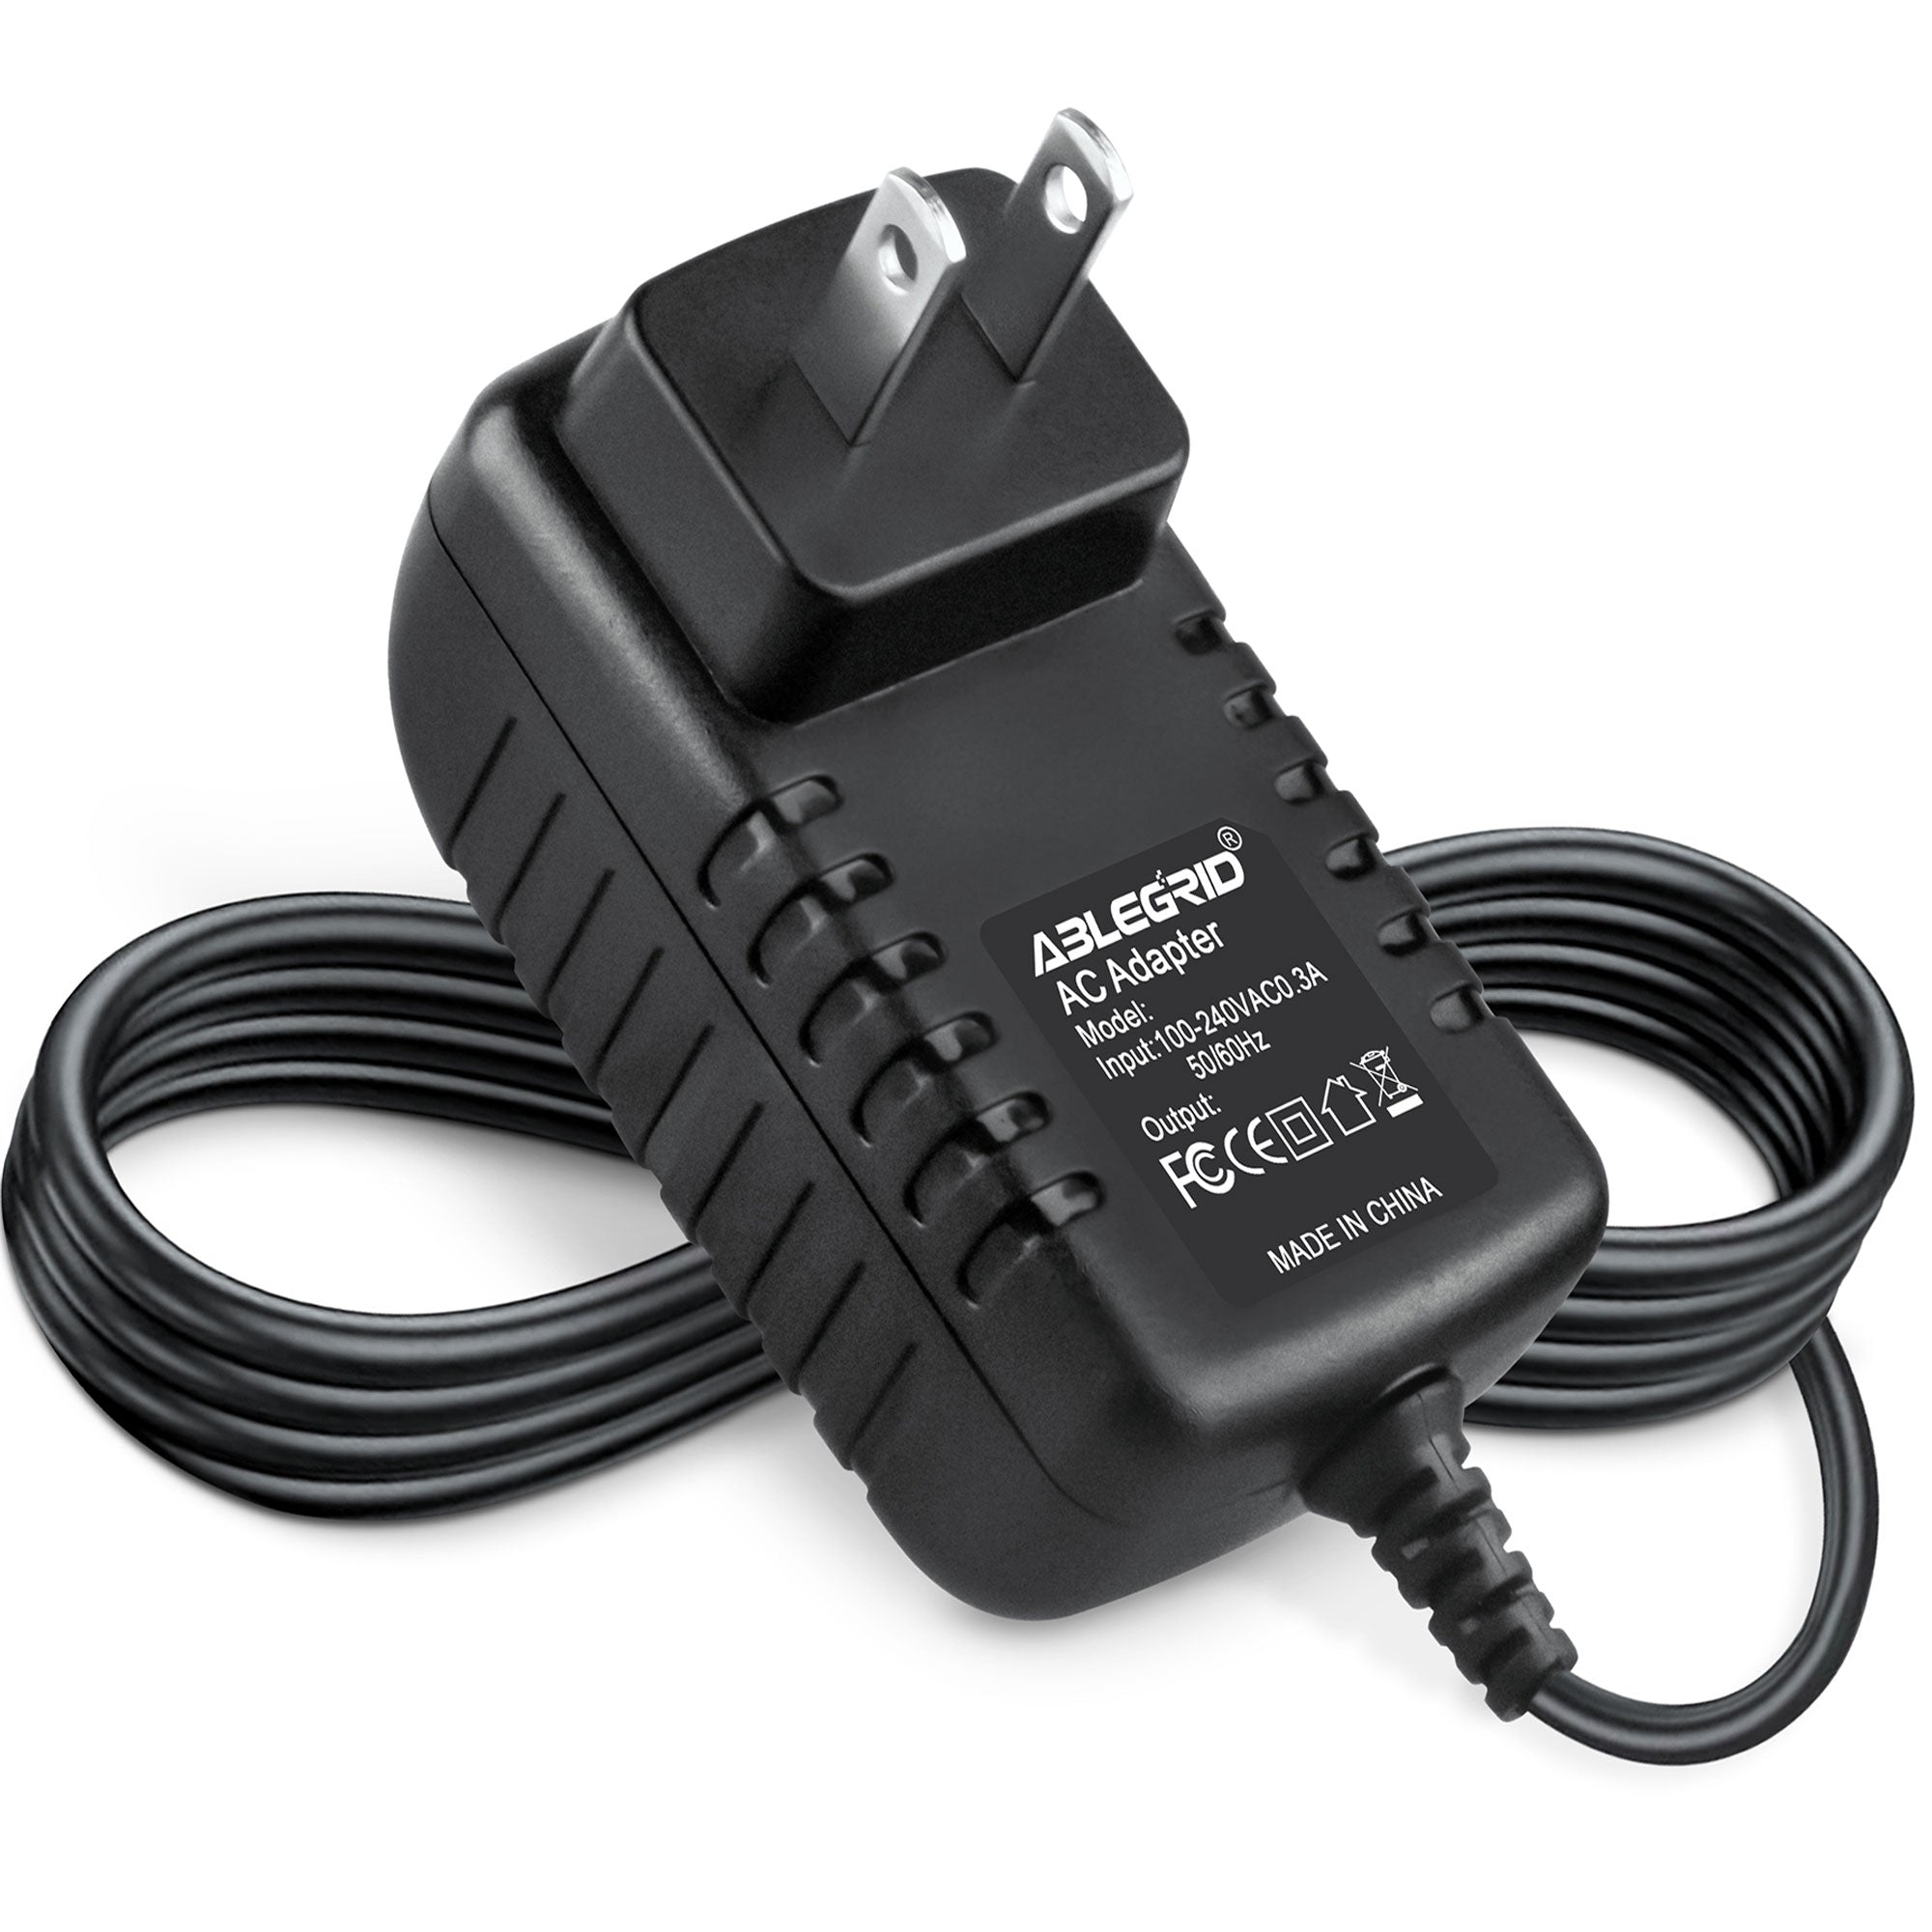 AbleGrid AC / DC Adapter for Cobra MicroTalk CXR800, CXR800C, PR4700WX, PR4700-2WXVP 2-Way Radio Power Supply Cord Cable PS Charger Input: 100 - 240 VAC 50/60Hz Worldwide Voltage Use PSU